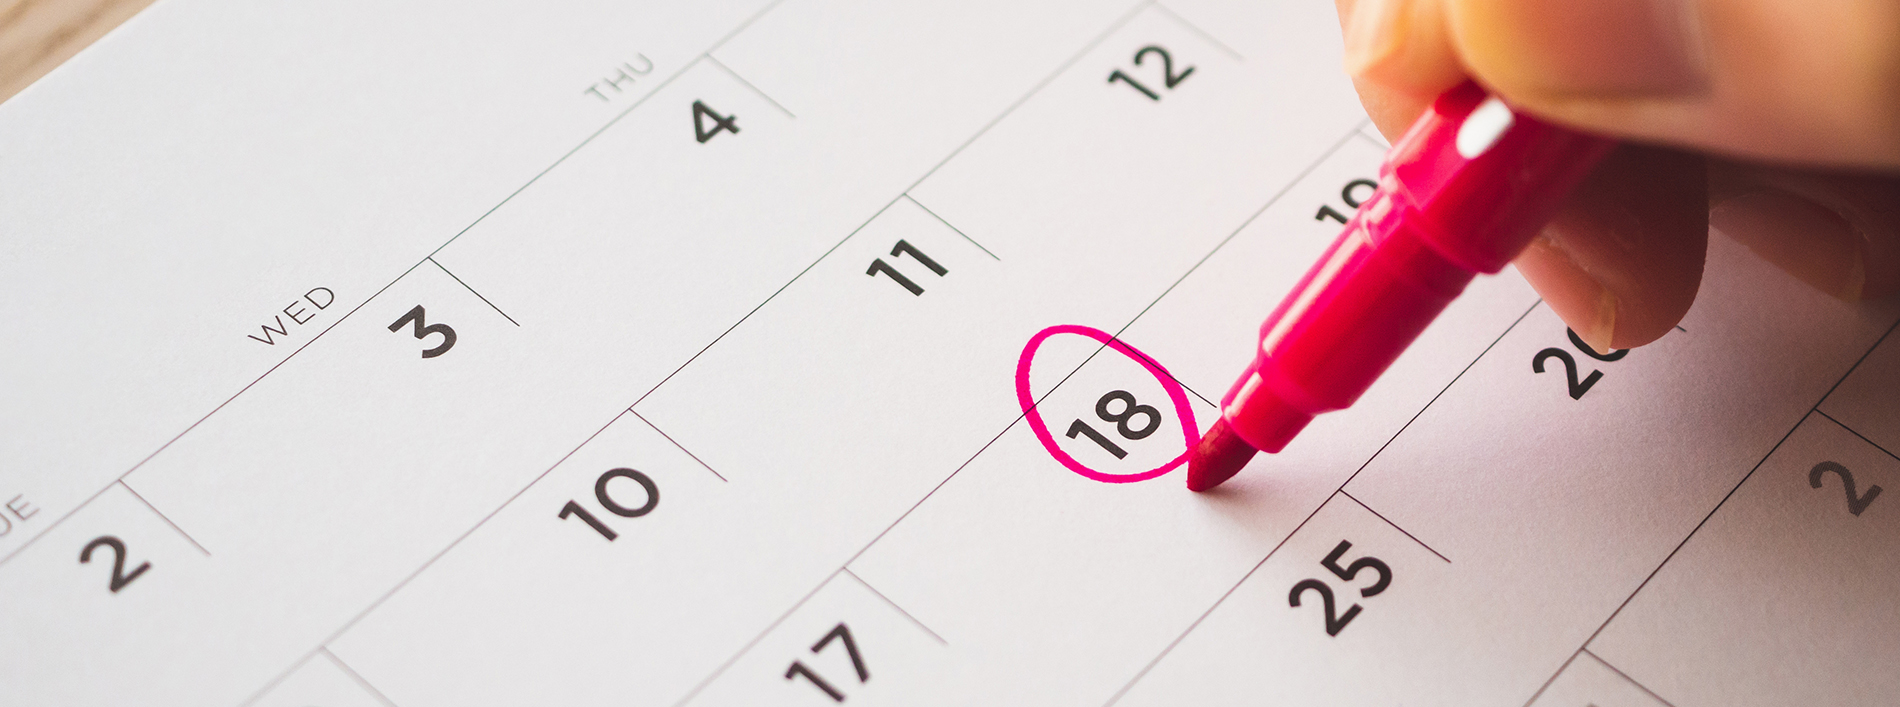 The image shows a close-up of a hand holding a pink highlighter marker, pointing to the number 18 on a printed calendar.